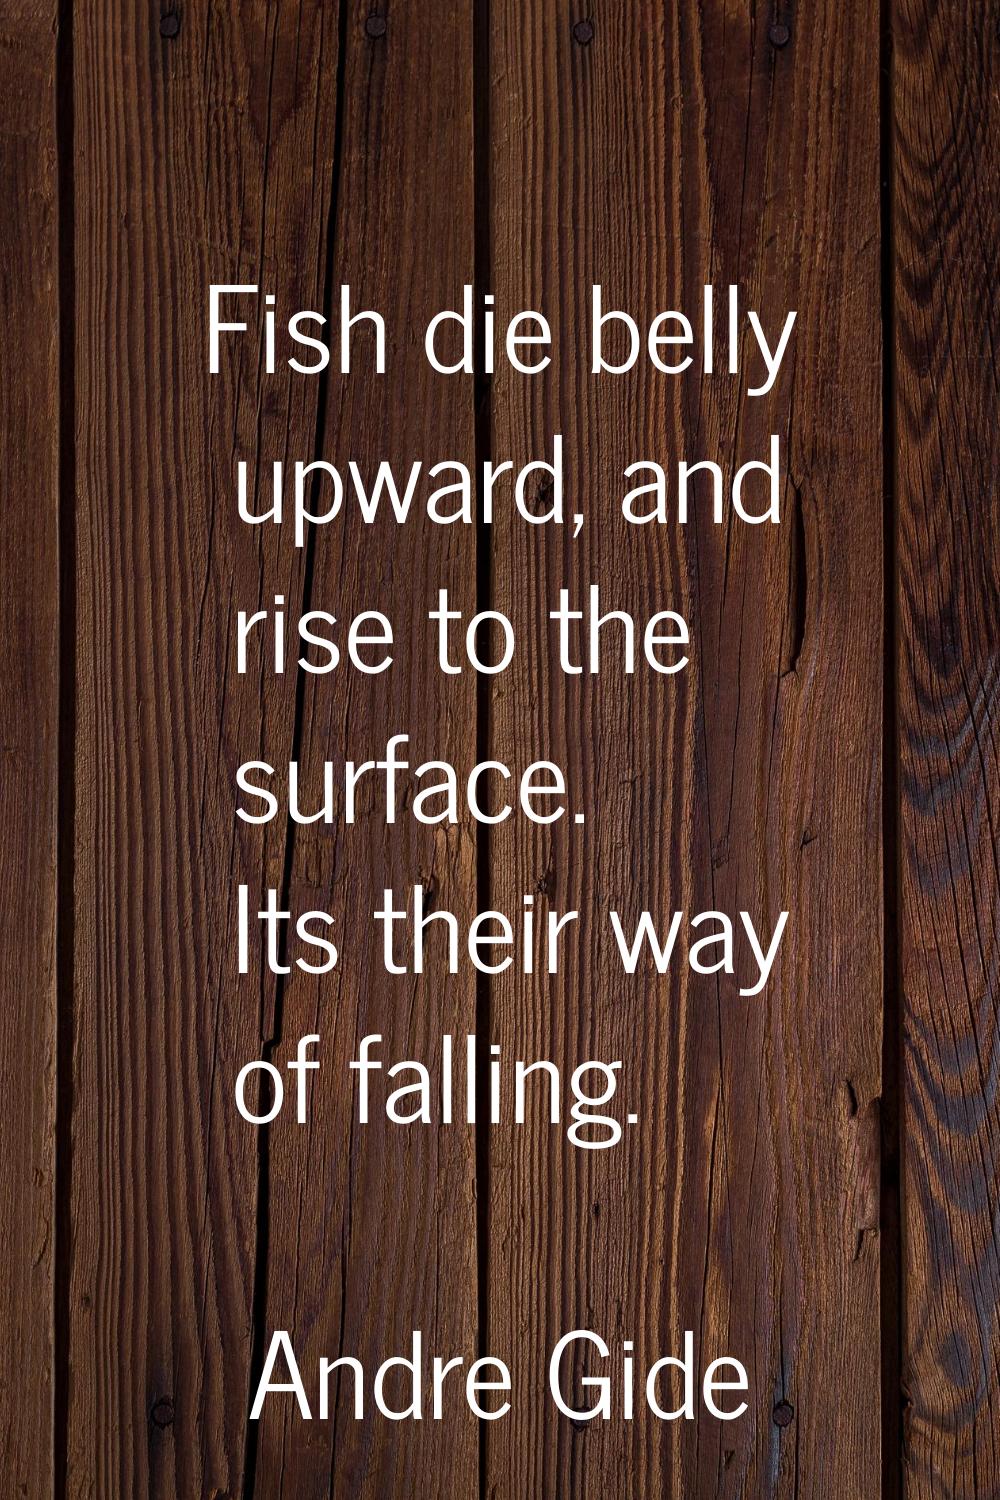 Fish die belly upward, and rise to the surface. Its their way of falling.